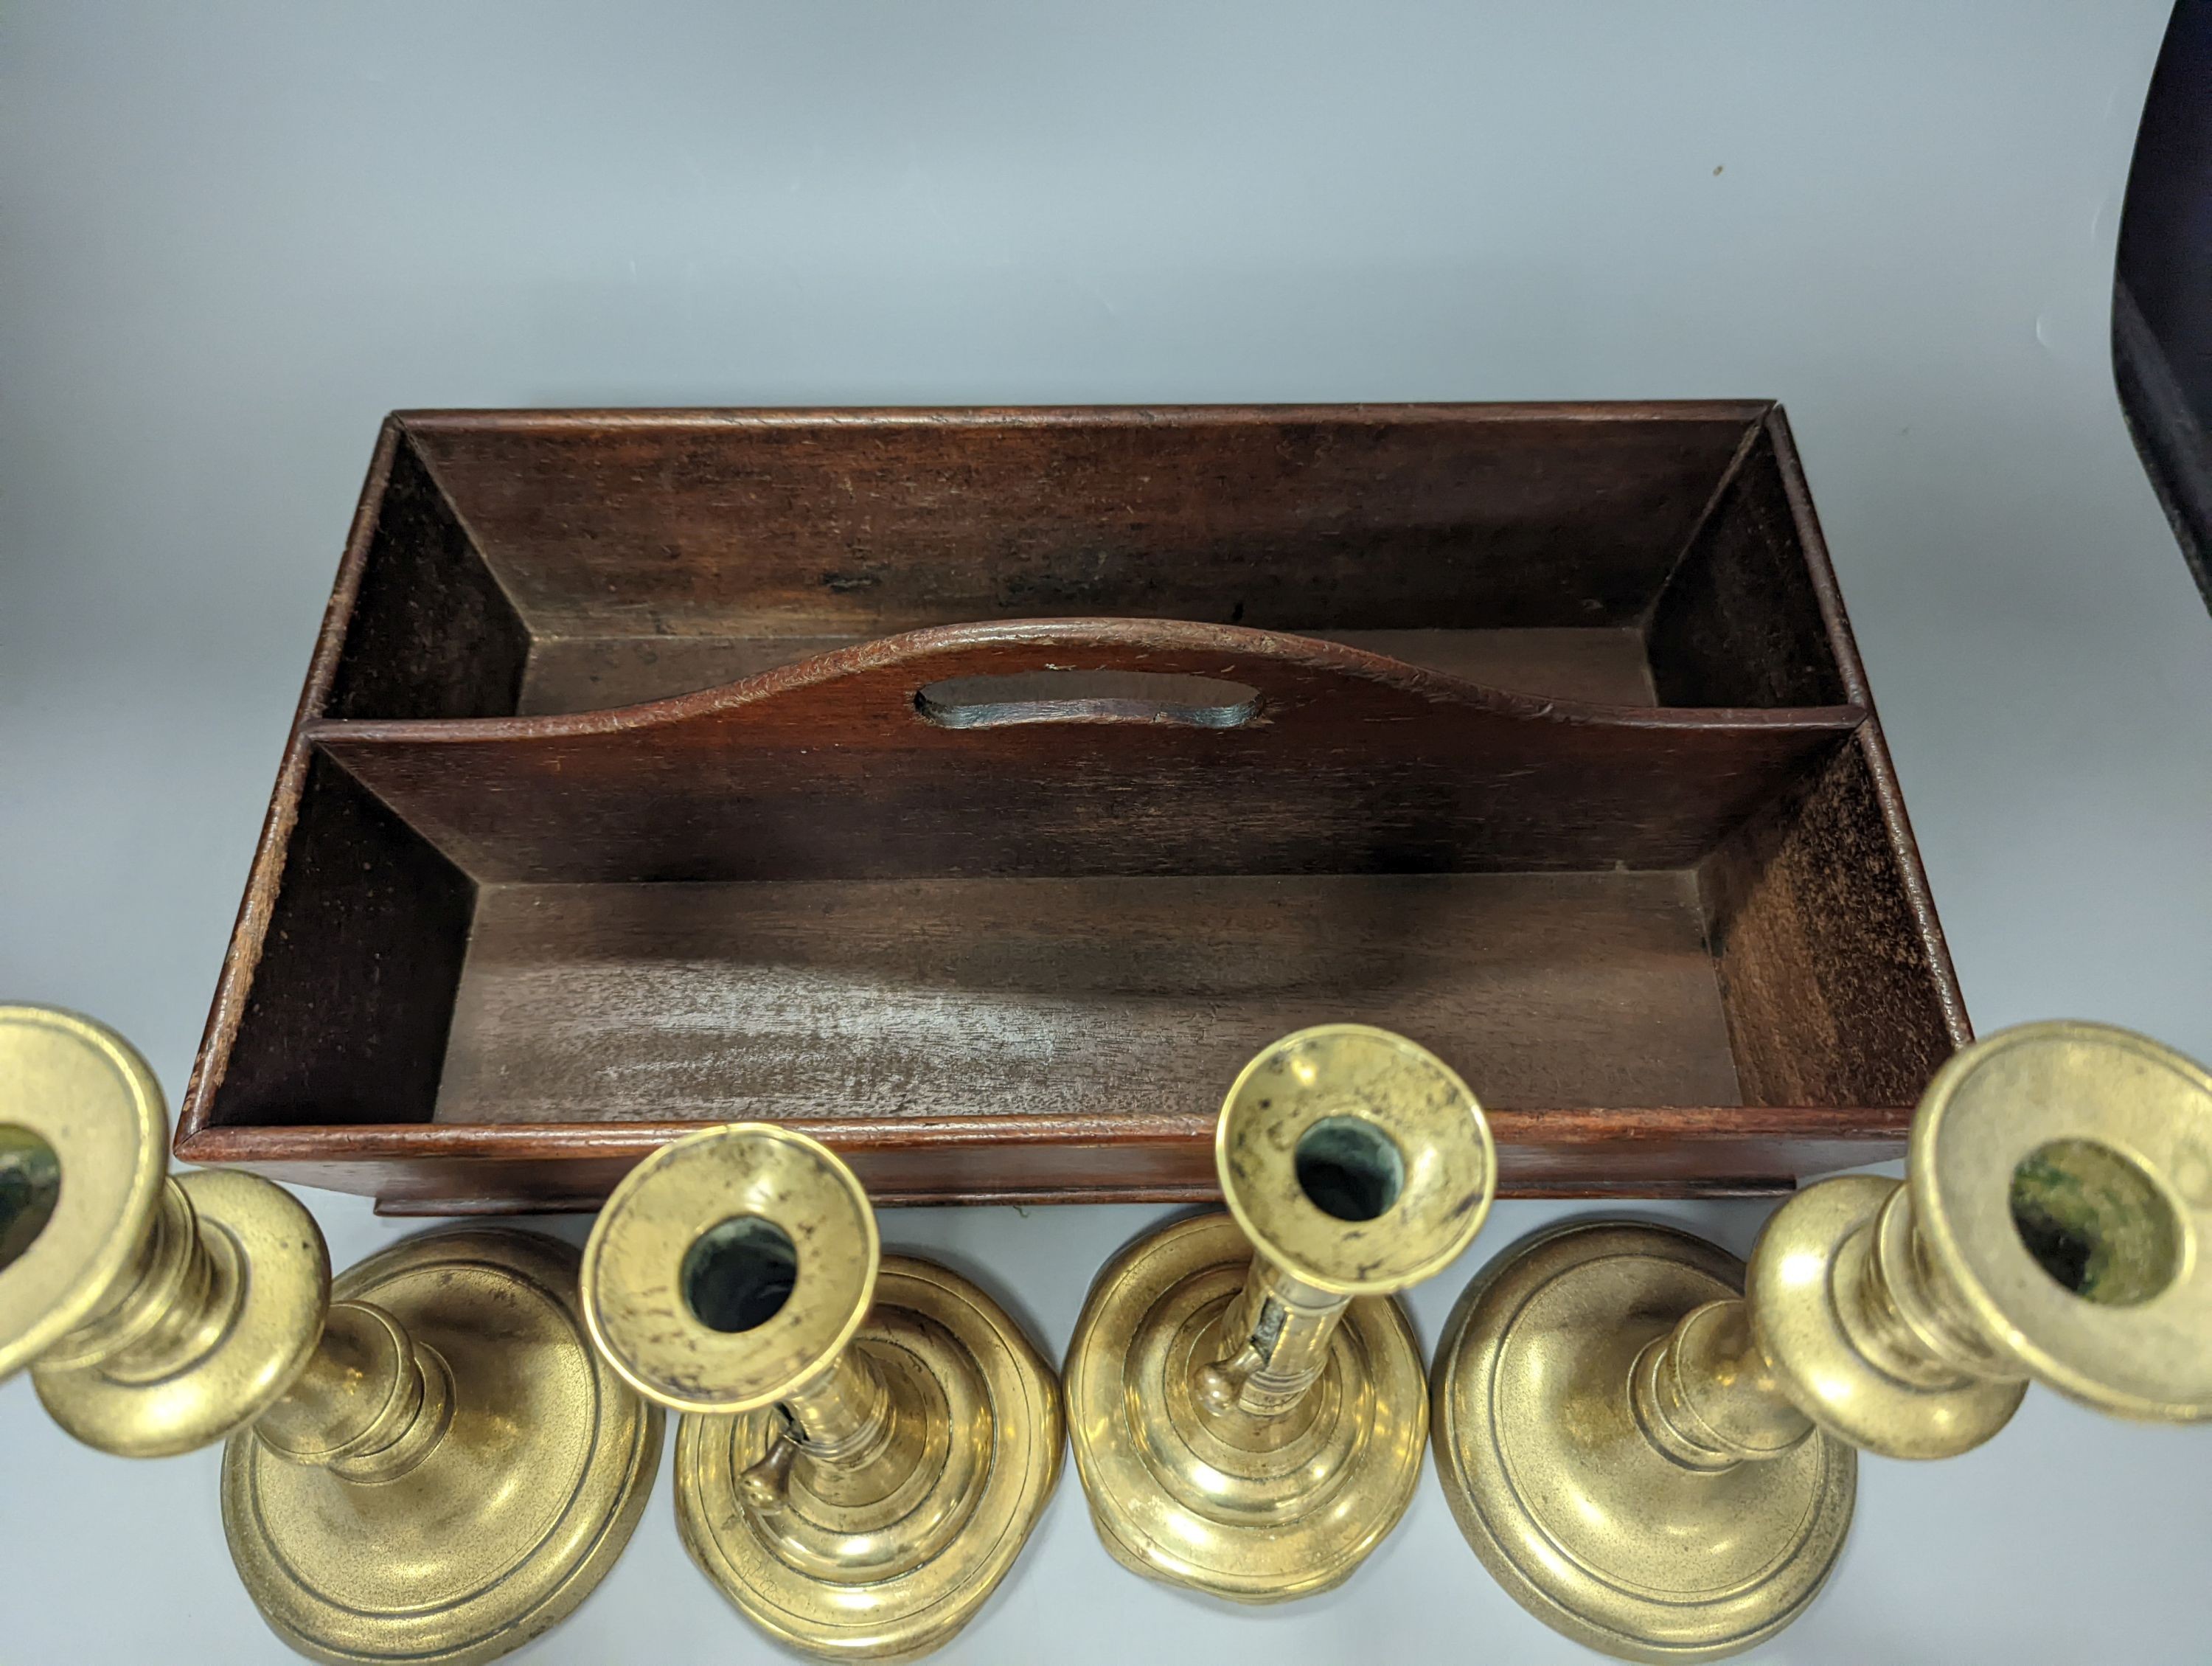 A pair of brass push-ejector candlesticks, a pair of Victorian brass candlesticks and a Victorian mahogany knife box, Knife box 38 cms wide.